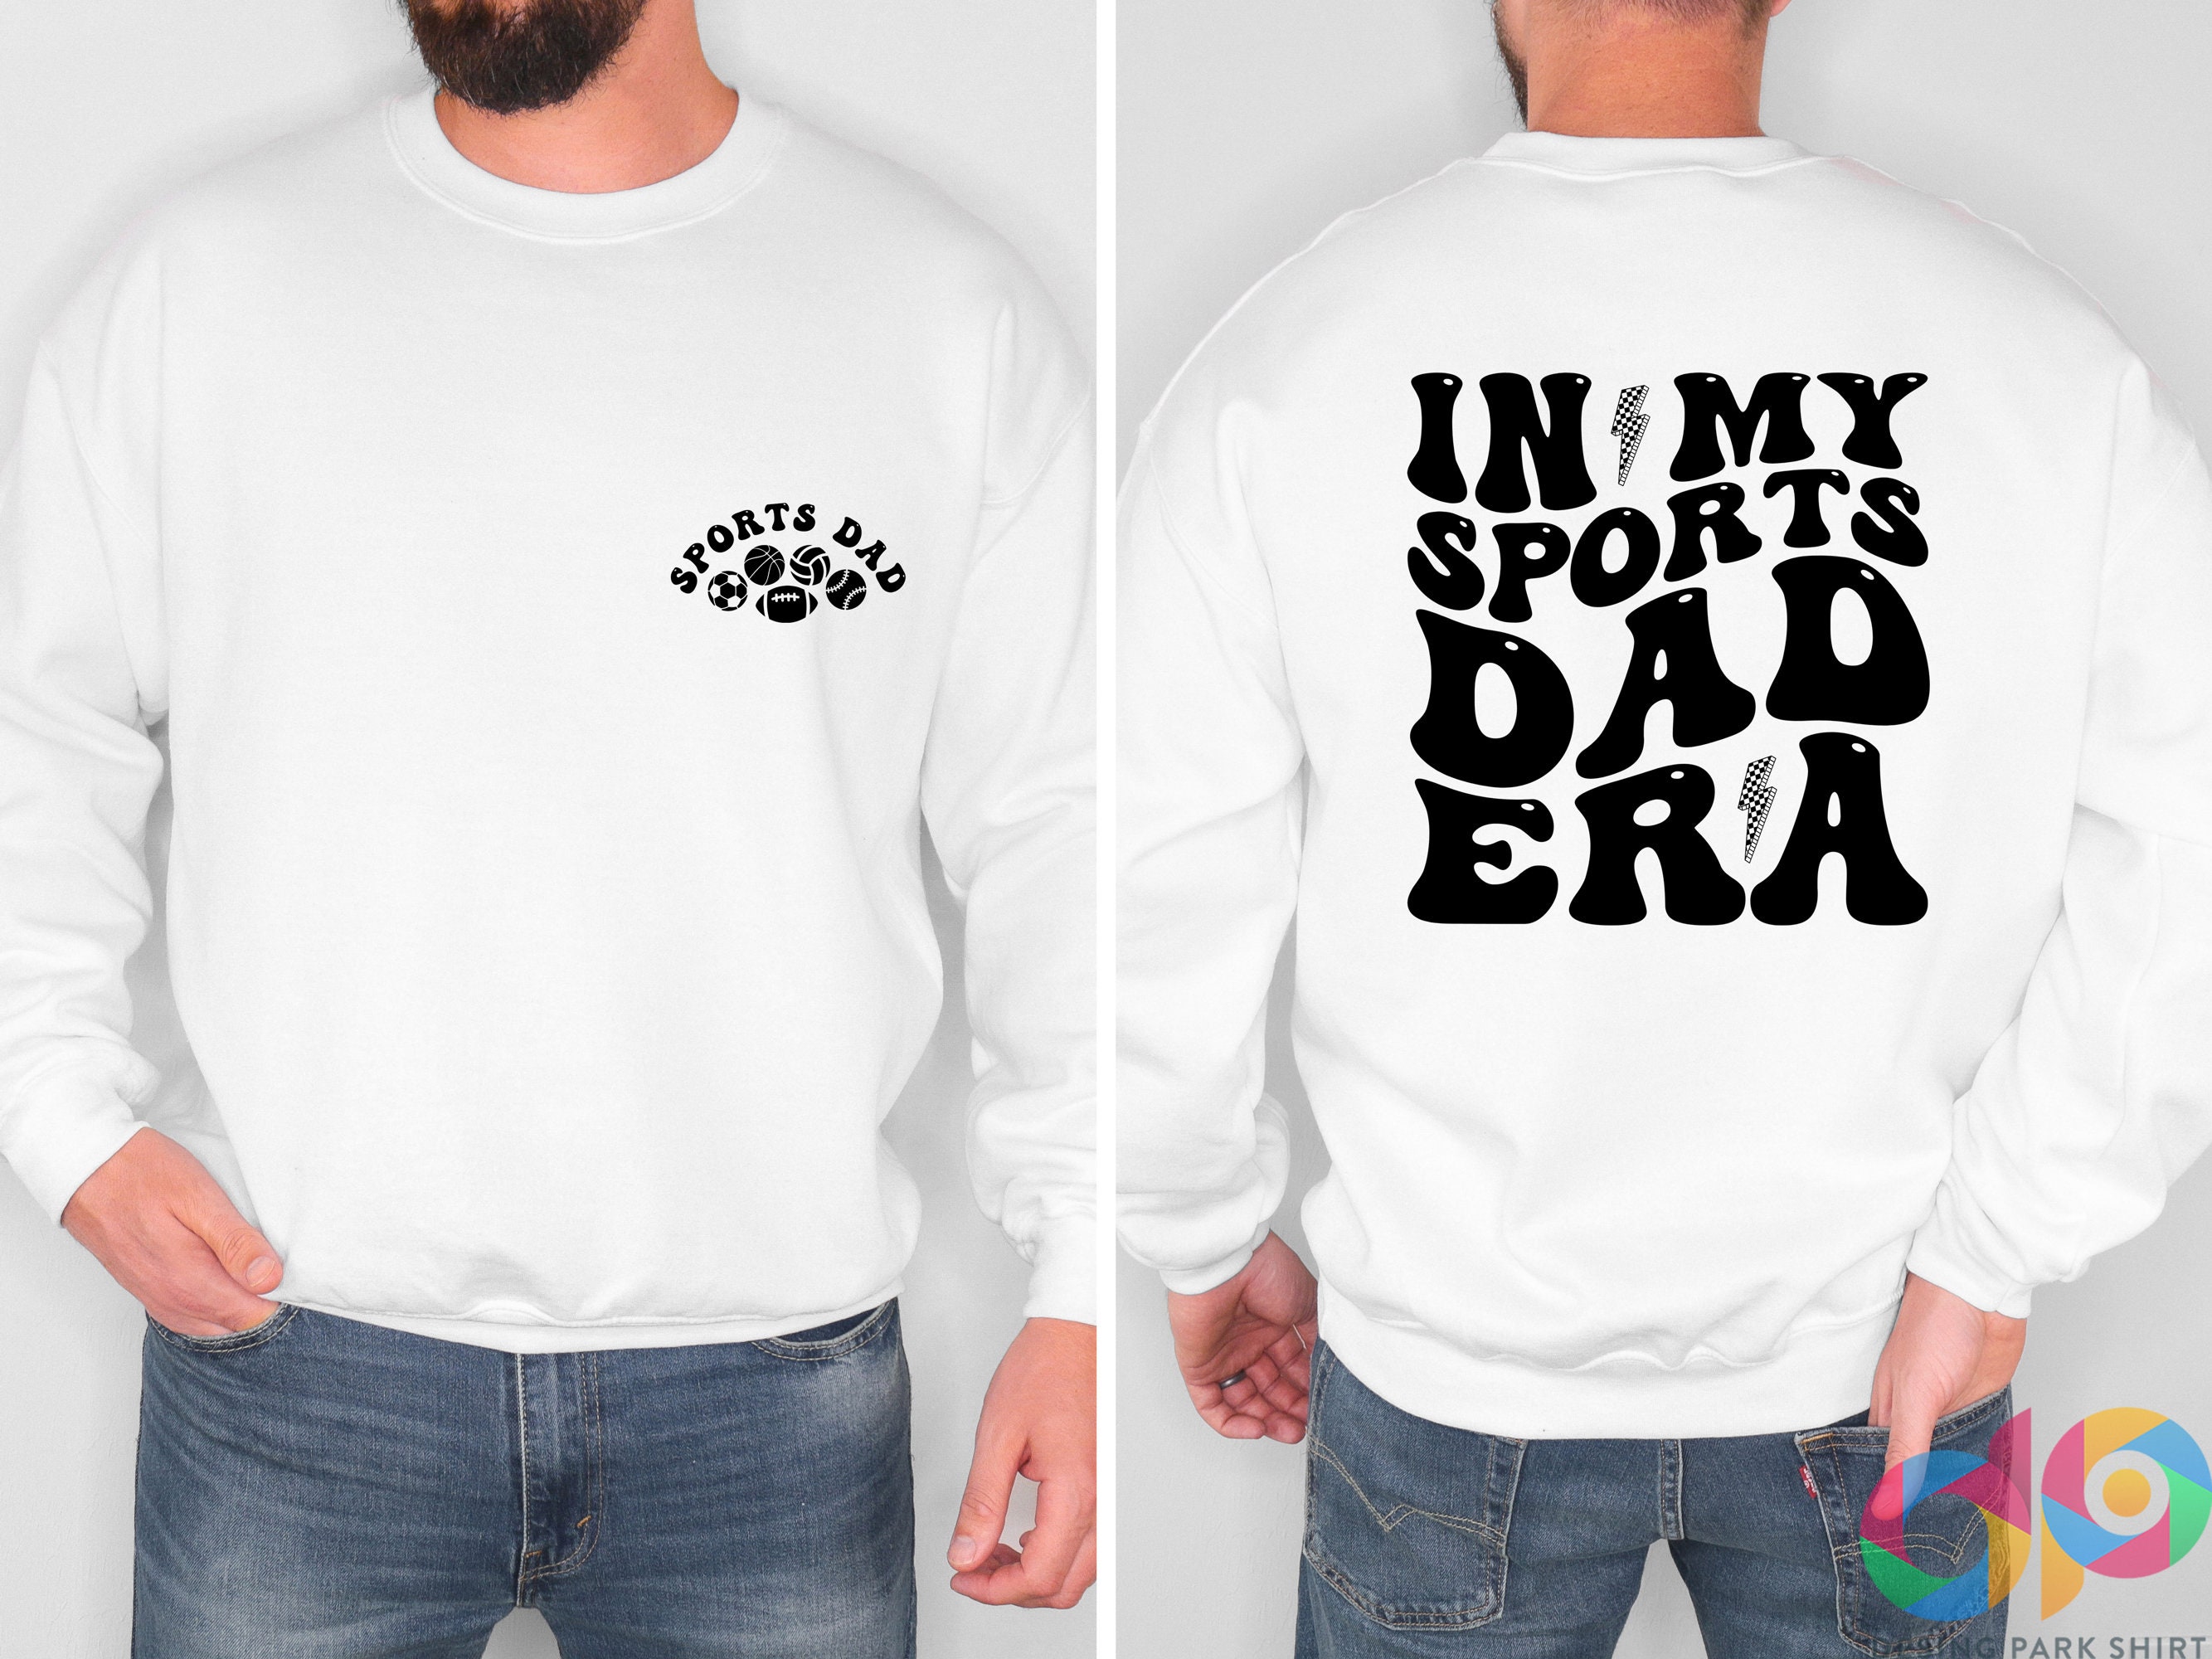 Discover In My Sports Dad Era Double Sided Sweatshirts